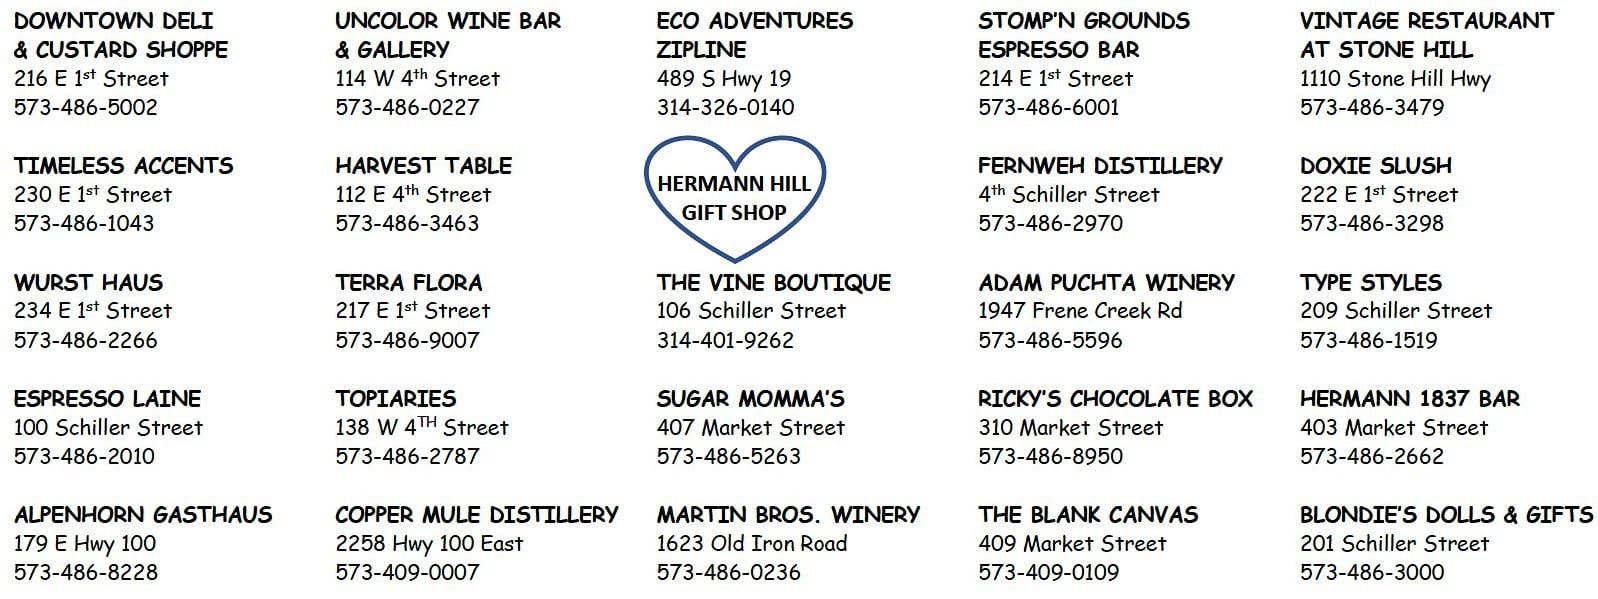 Copy of voucher with list of stores where guests can use their voucher.